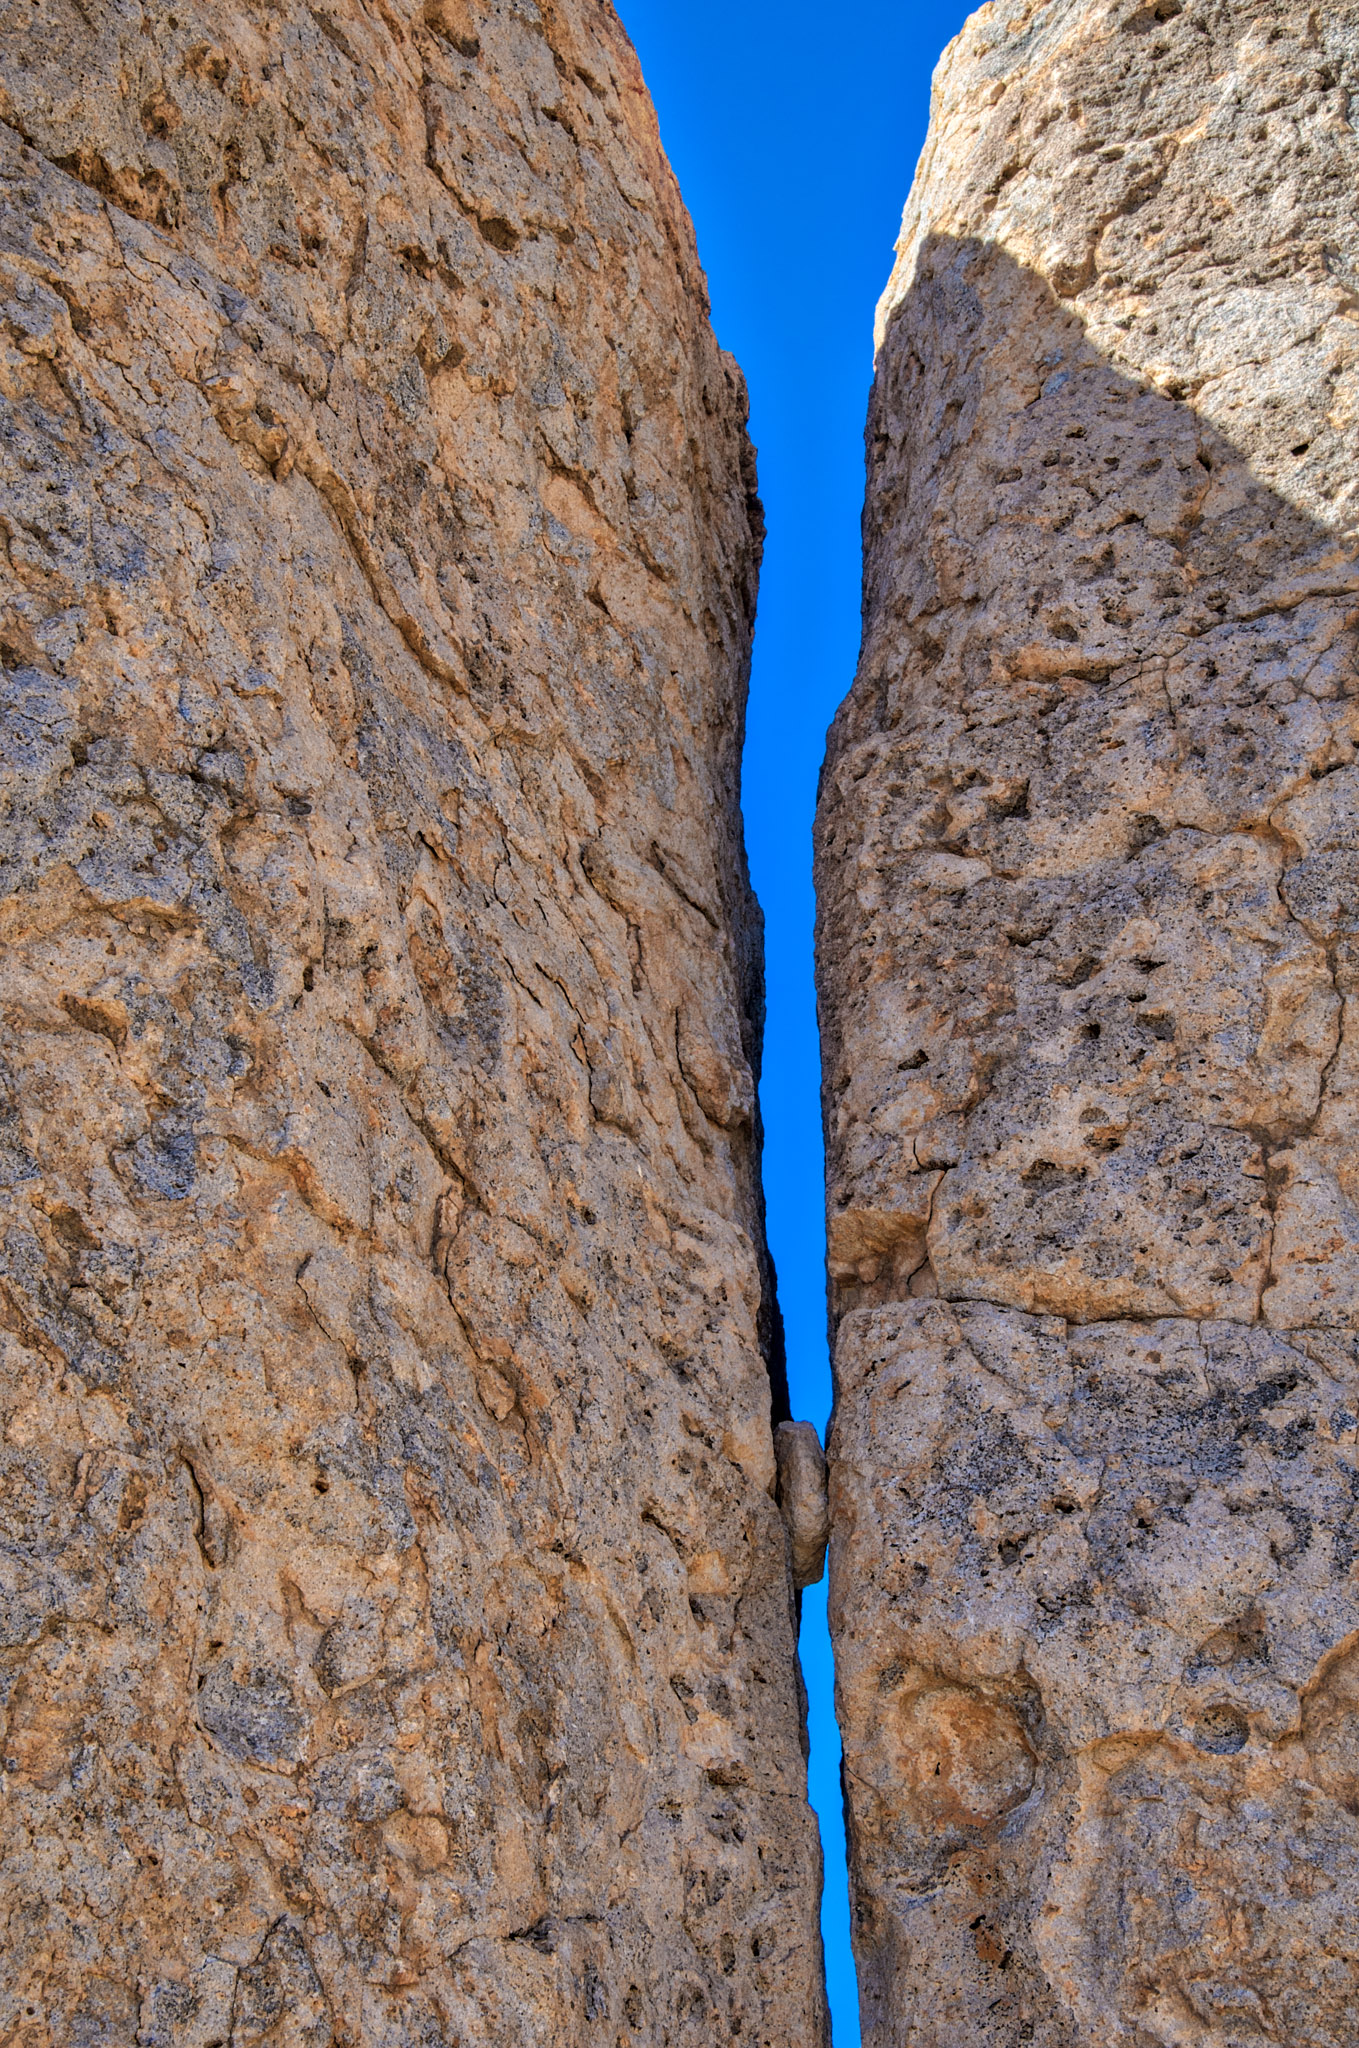 A piece of eroded rock is trapped in a crack between two pinnacles in City of Rocks State Park between Deming and Silver City, New Mexico.